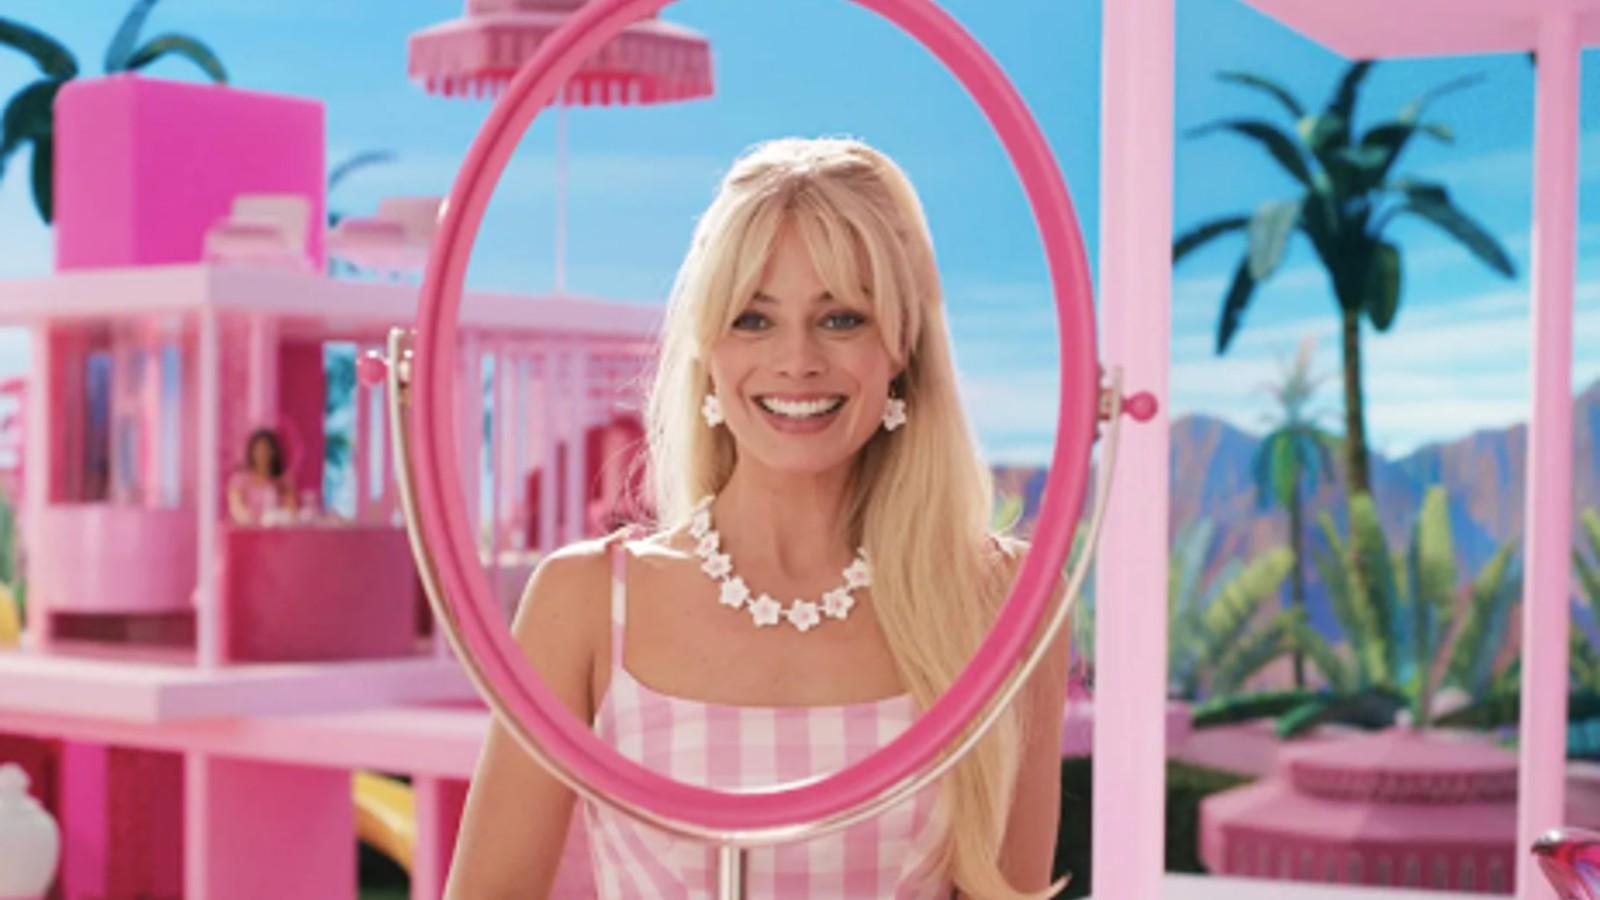 Barbie's Malibu DreamHouse is back on Airbnb, and you can win a free stay